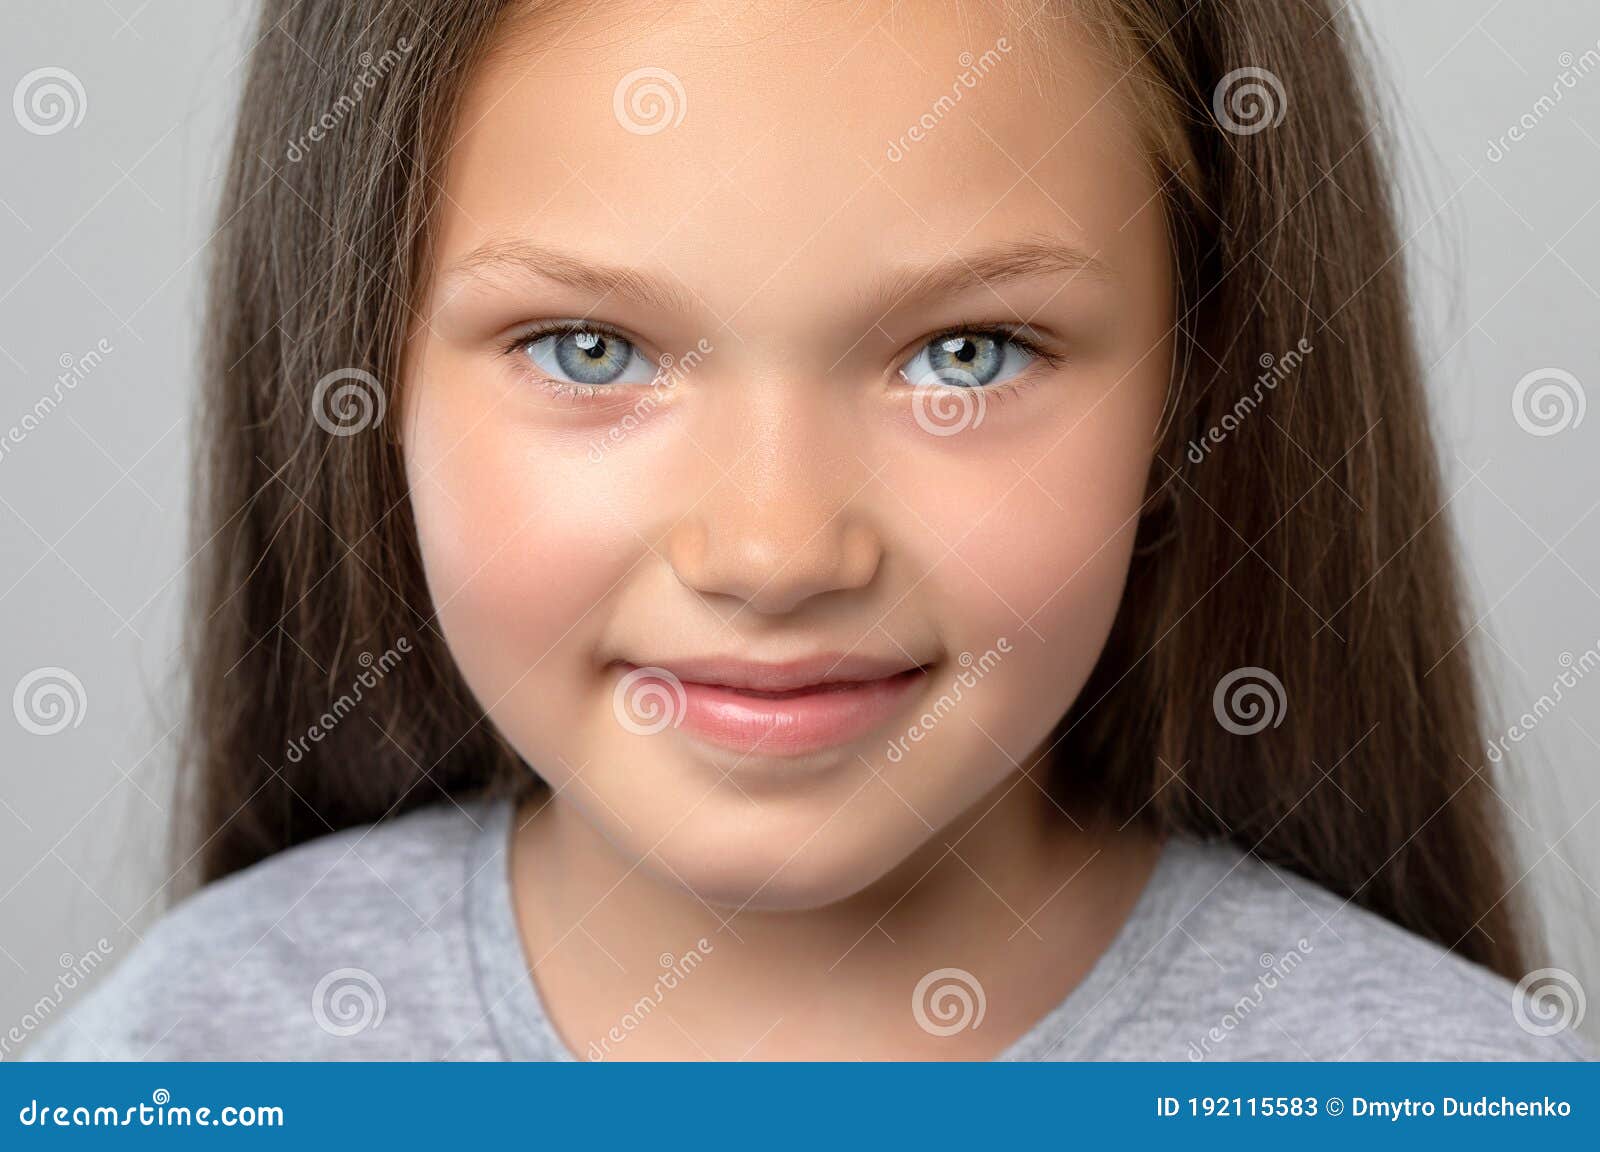 Portrait of a Beautiful Smiling Girl with Blue Eyes, with Light Brown Hair.  she Looks into the Camera Stock Image - Image of daughter, cosmetician:  192115583